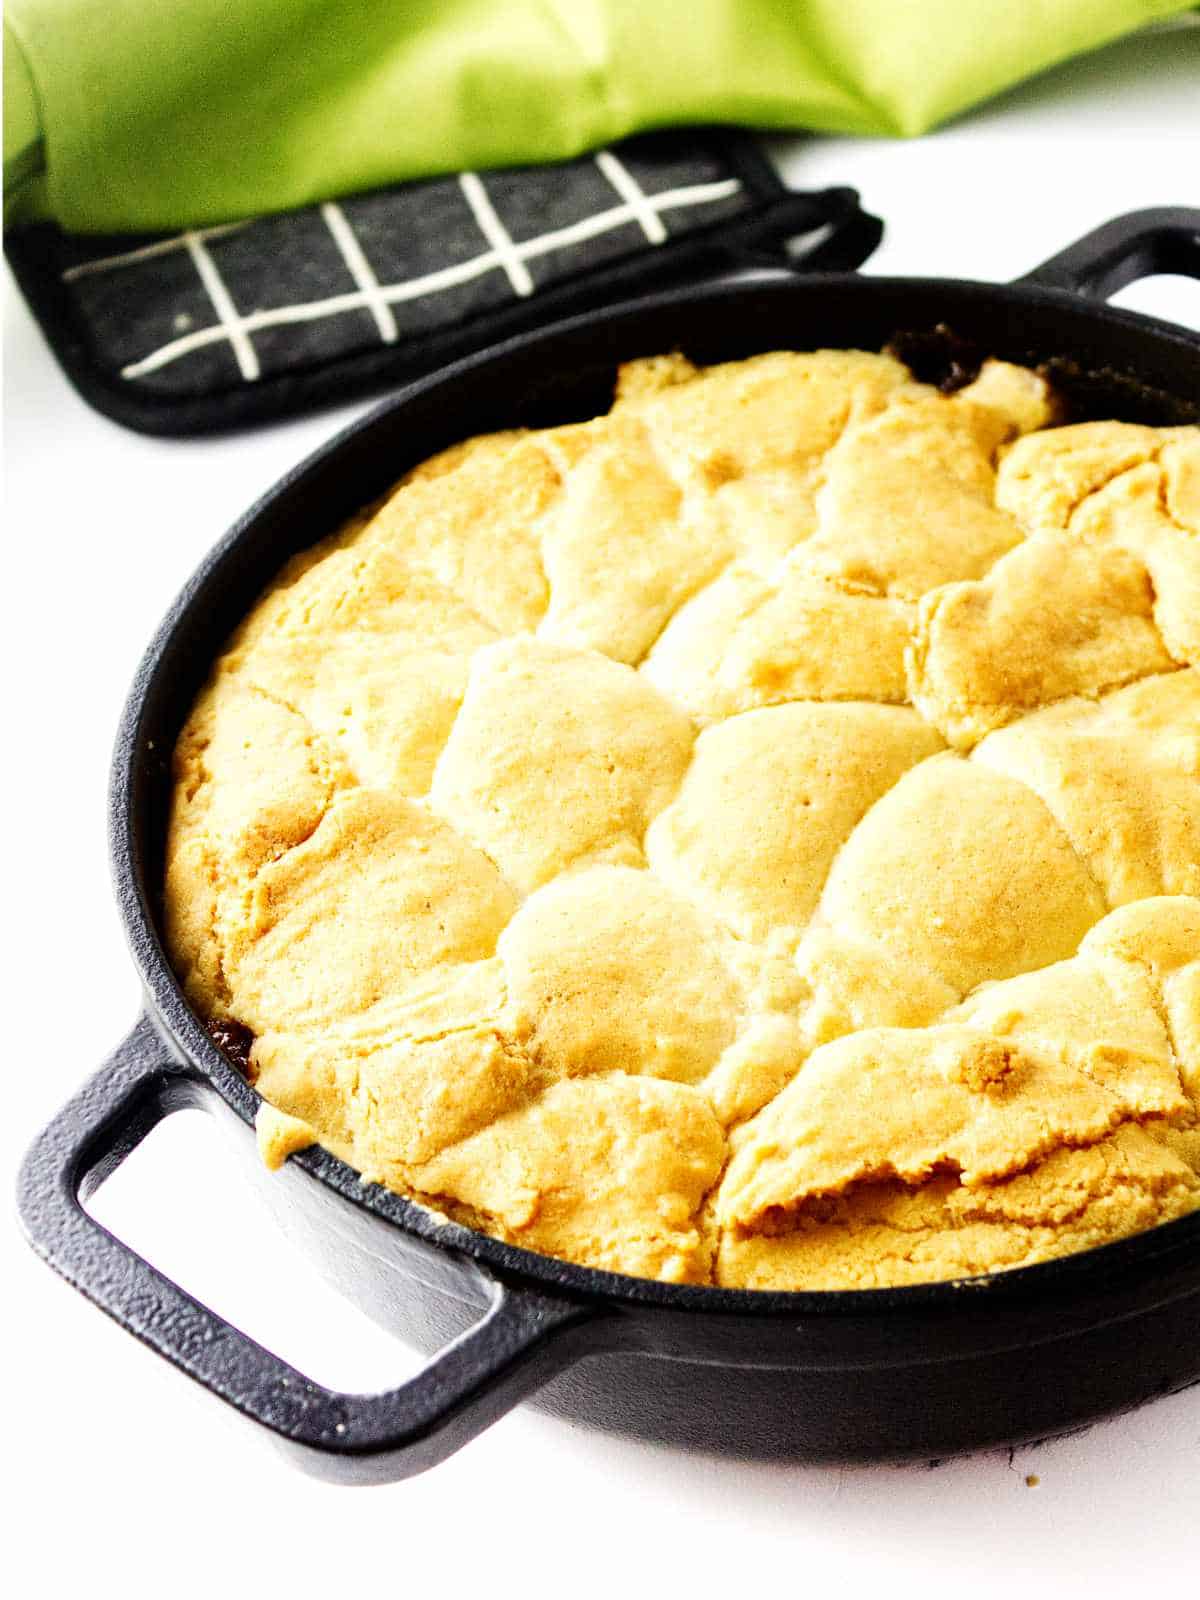 baked fruit and cake in a skillet.